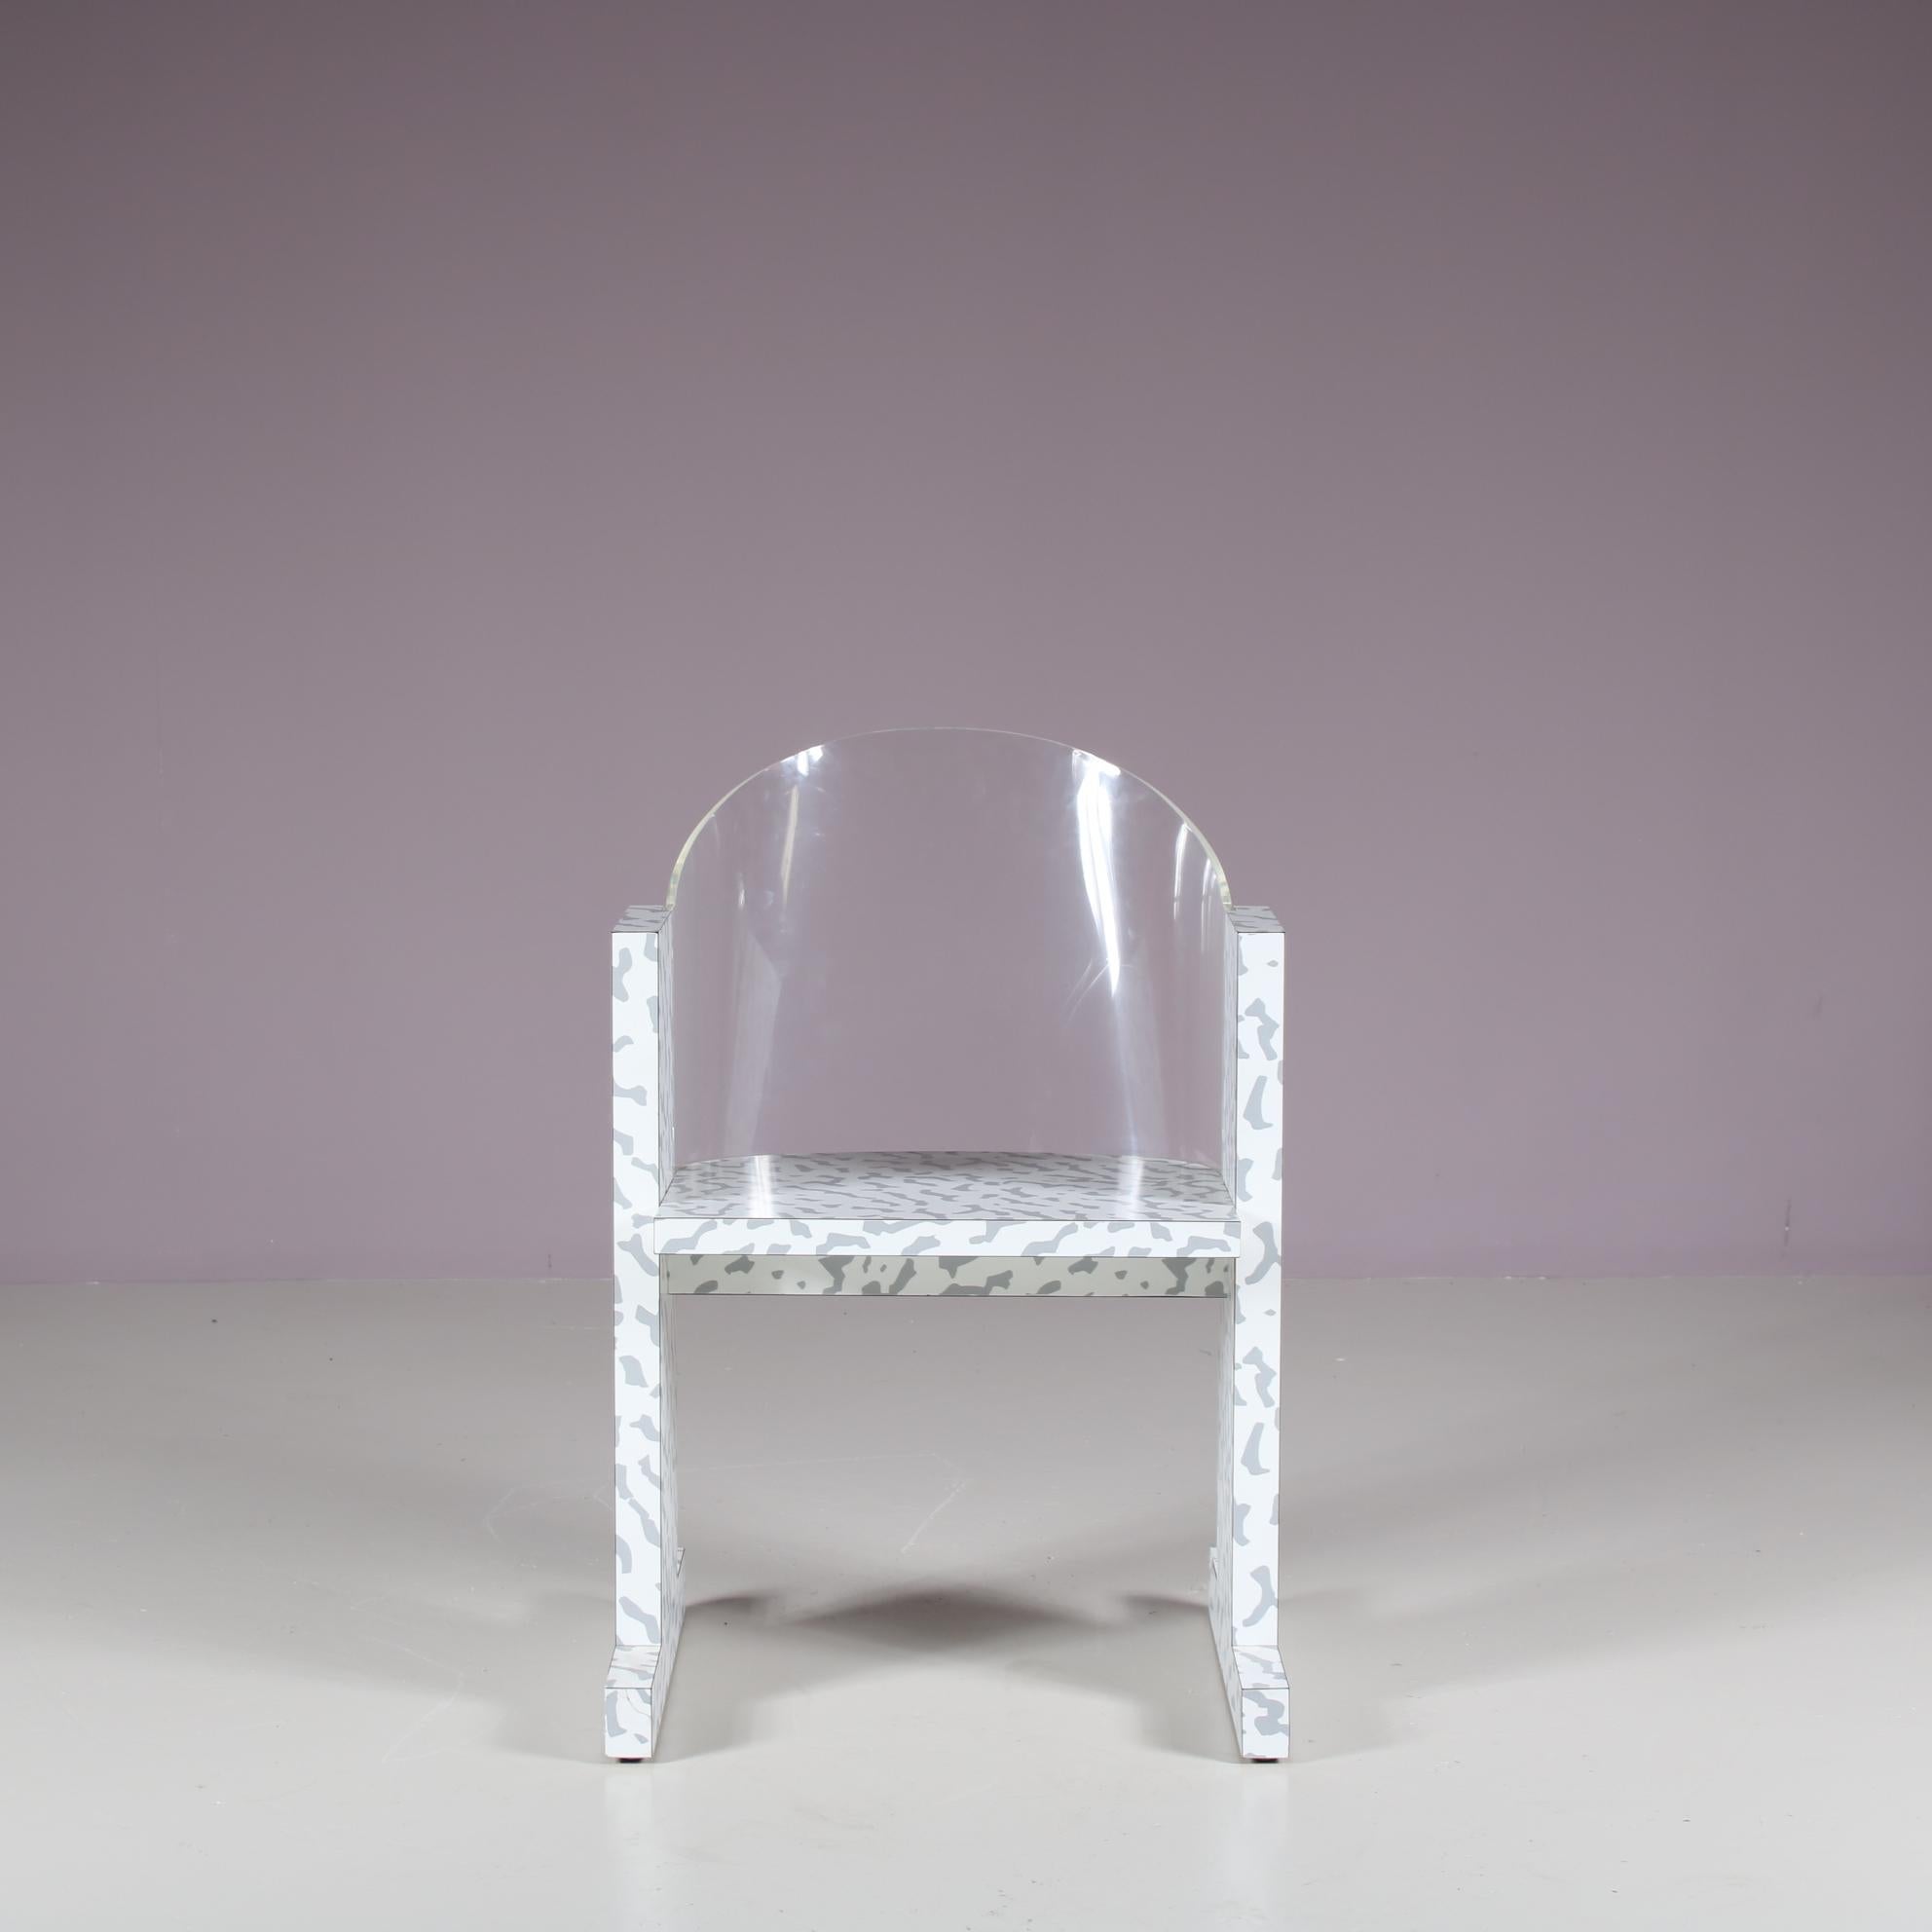 A wonderful “Teodora” side chair, designed by Ettore Sottsass and manufactured by Vitra in Germany around 1985.

This unique chair is an outstanding piece in Memphis style, designed by iconic designer Sottsass shortly after leaving the Memphis